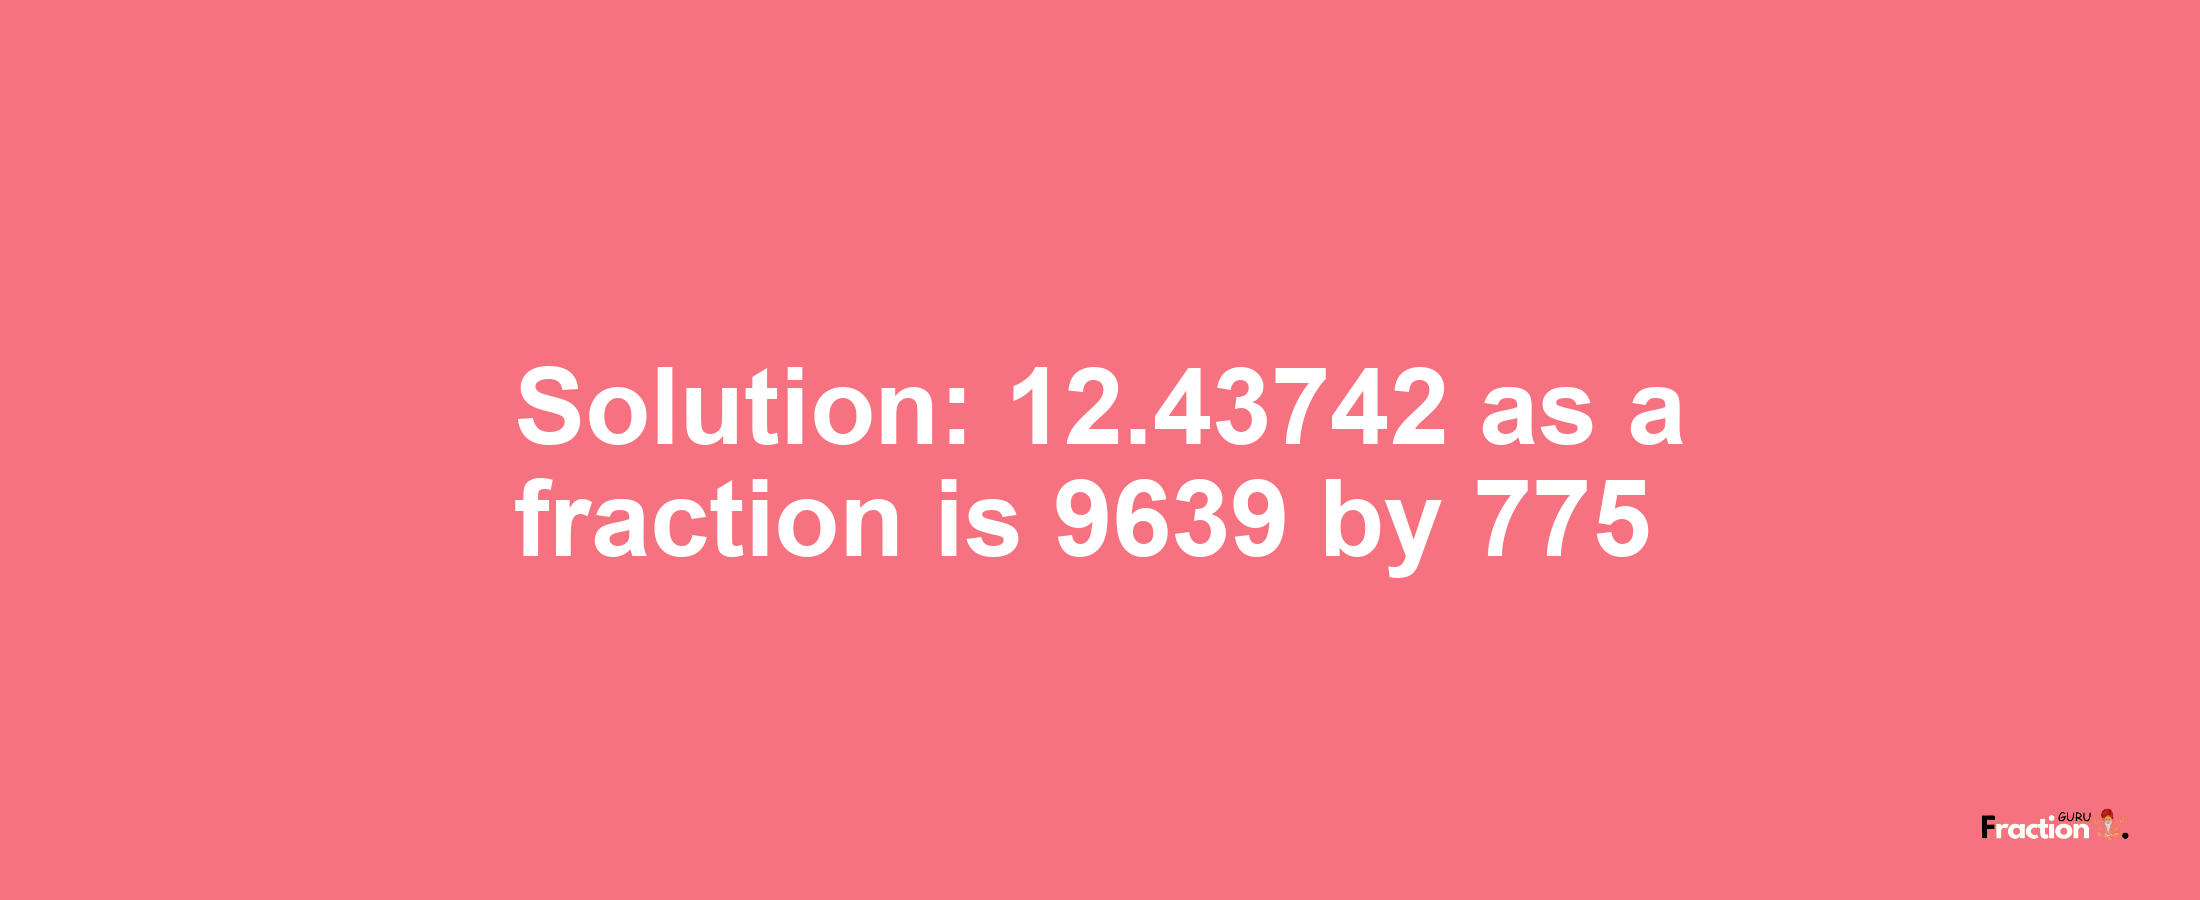 Solution:12.43742 as a fraction is 9639/775